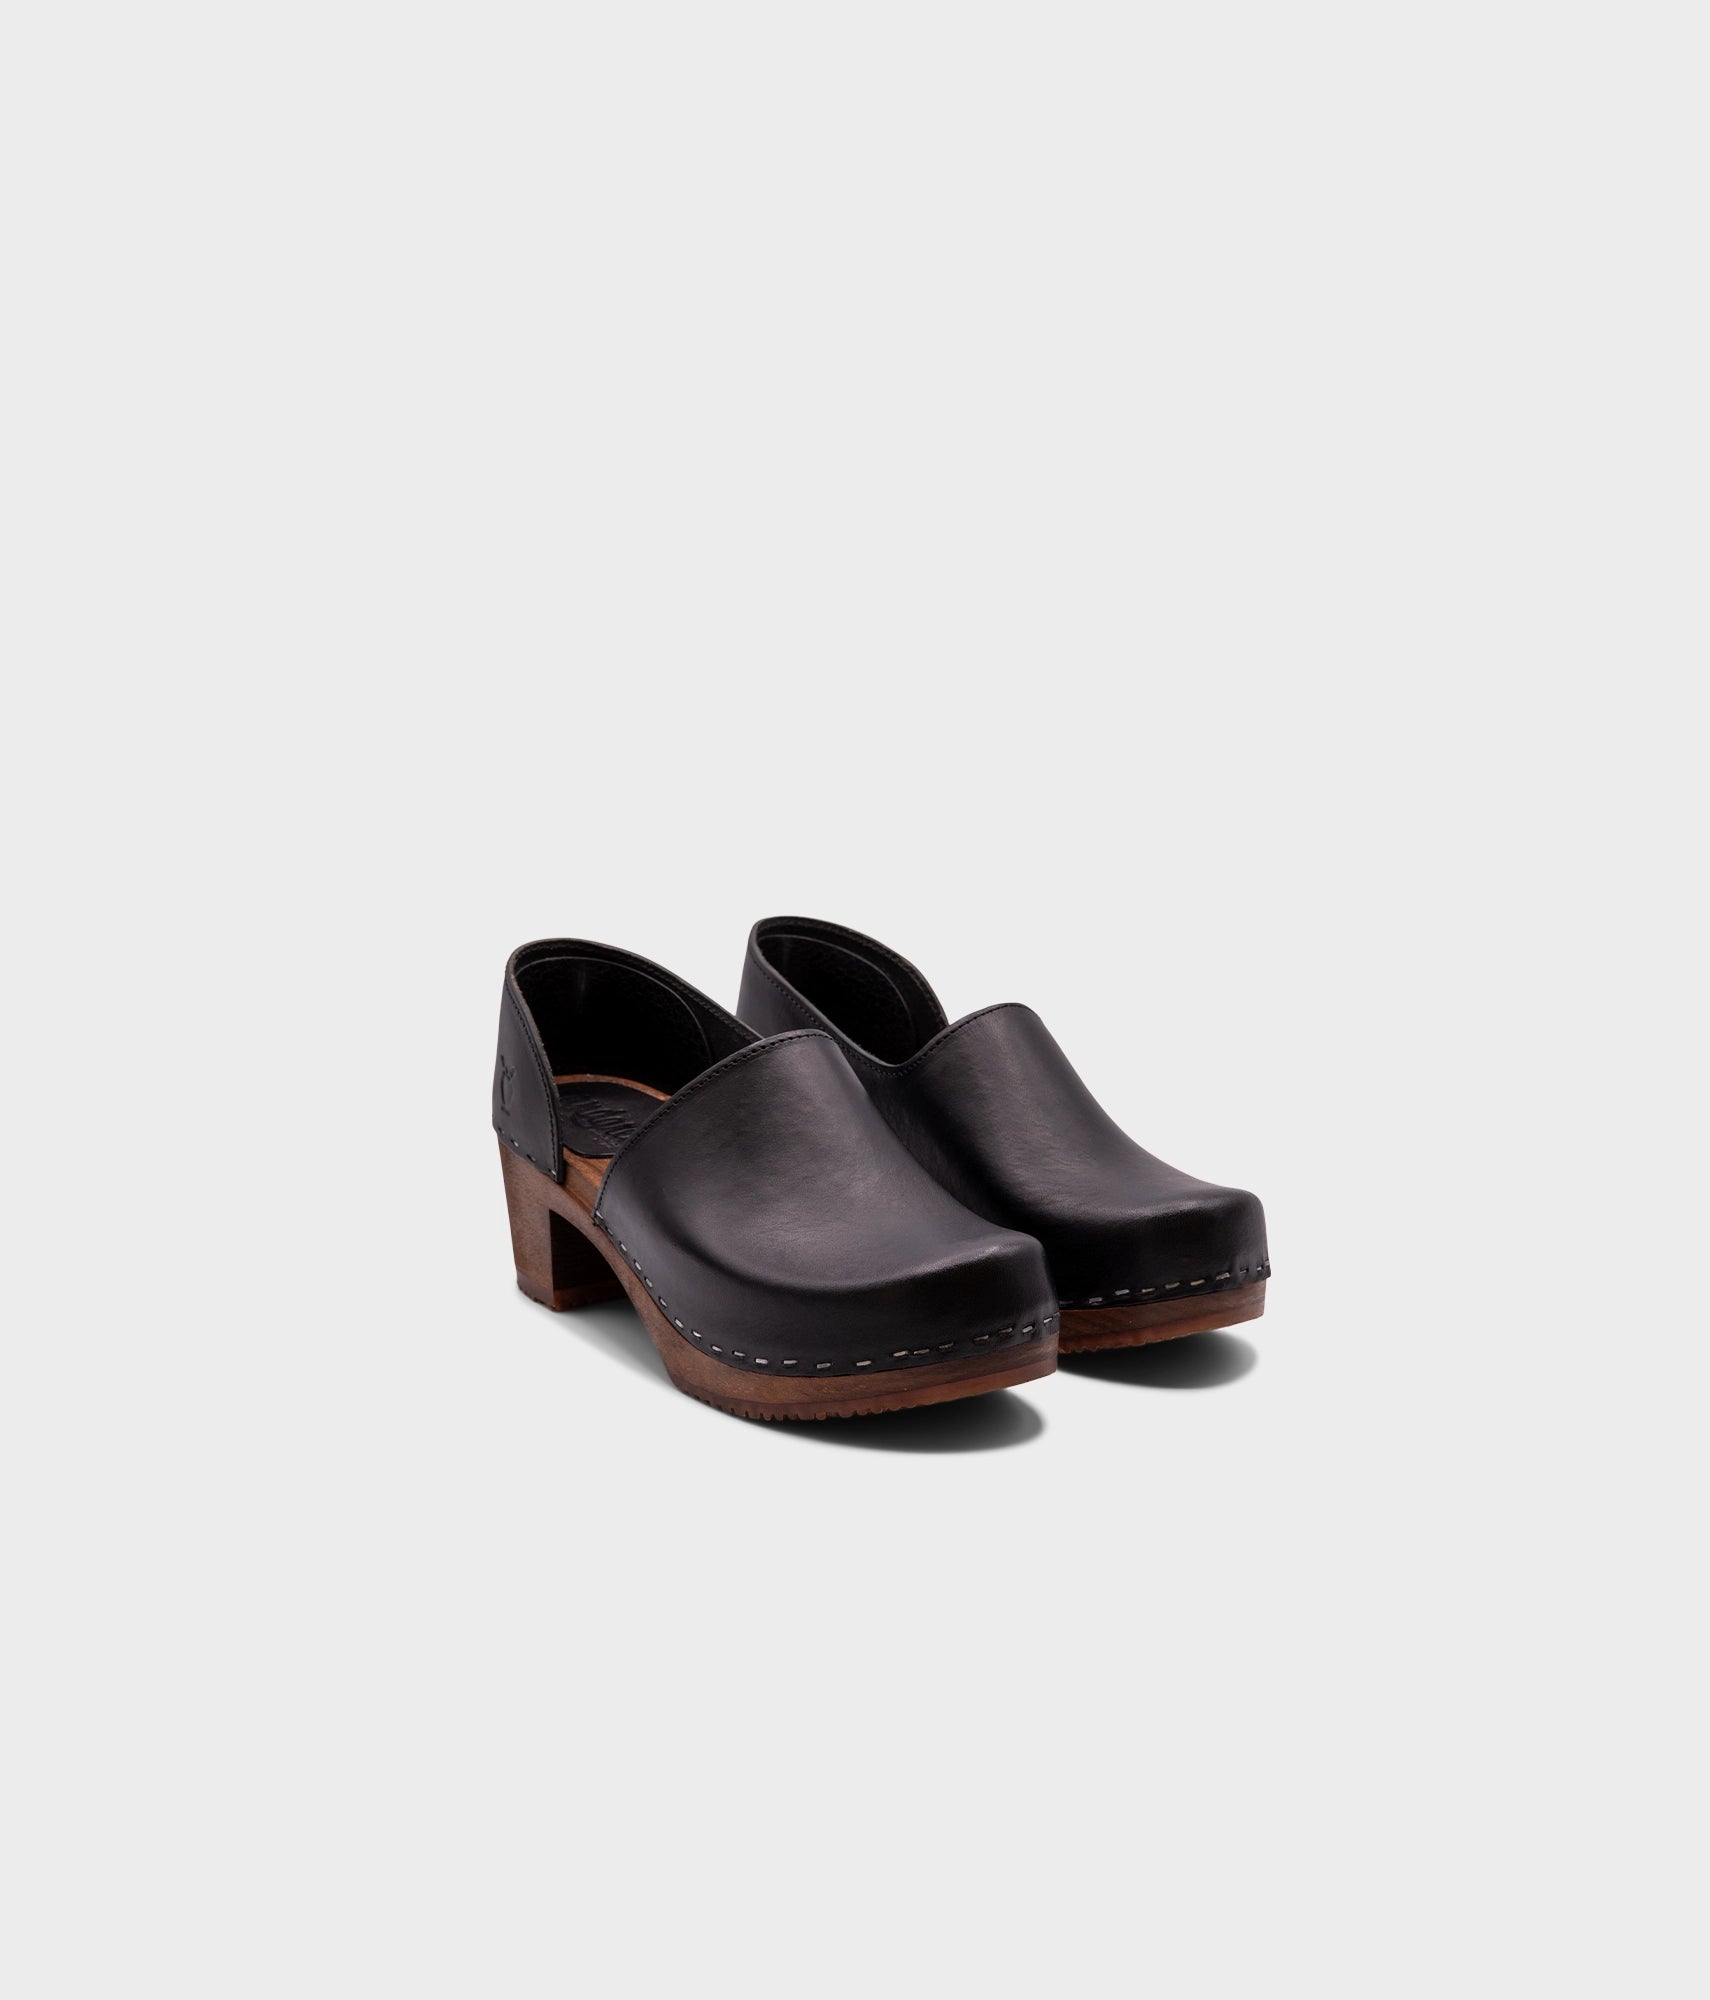 high heeled closed-back clogs in black vegetable tanned leather stapled on a dark wooden base